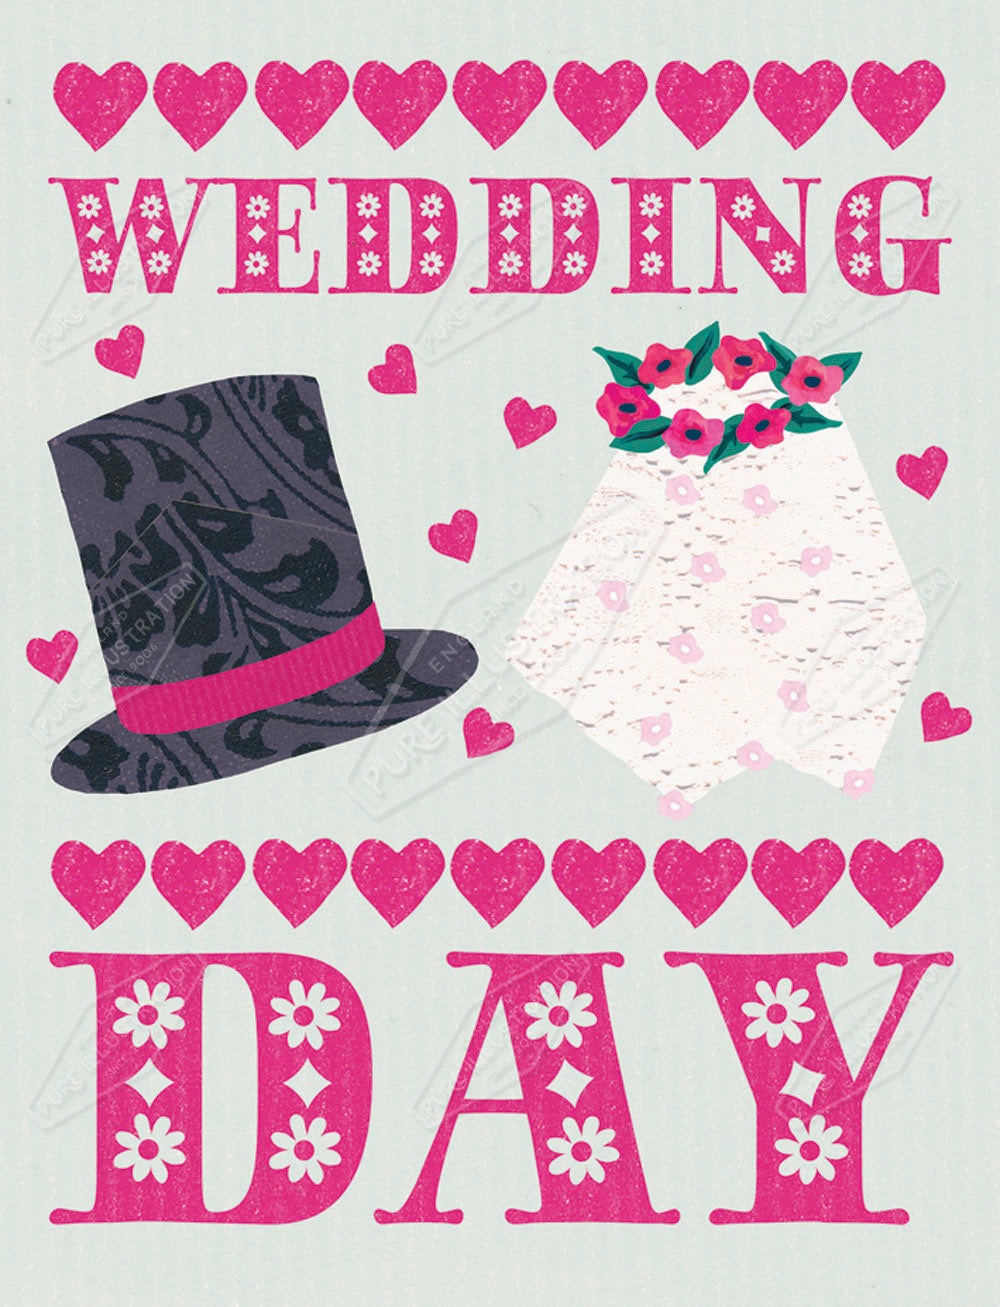 00016028SSN- Sian Summerhayes is represented by Pure Art Licensing Agency - Wedding Greeting Card Design